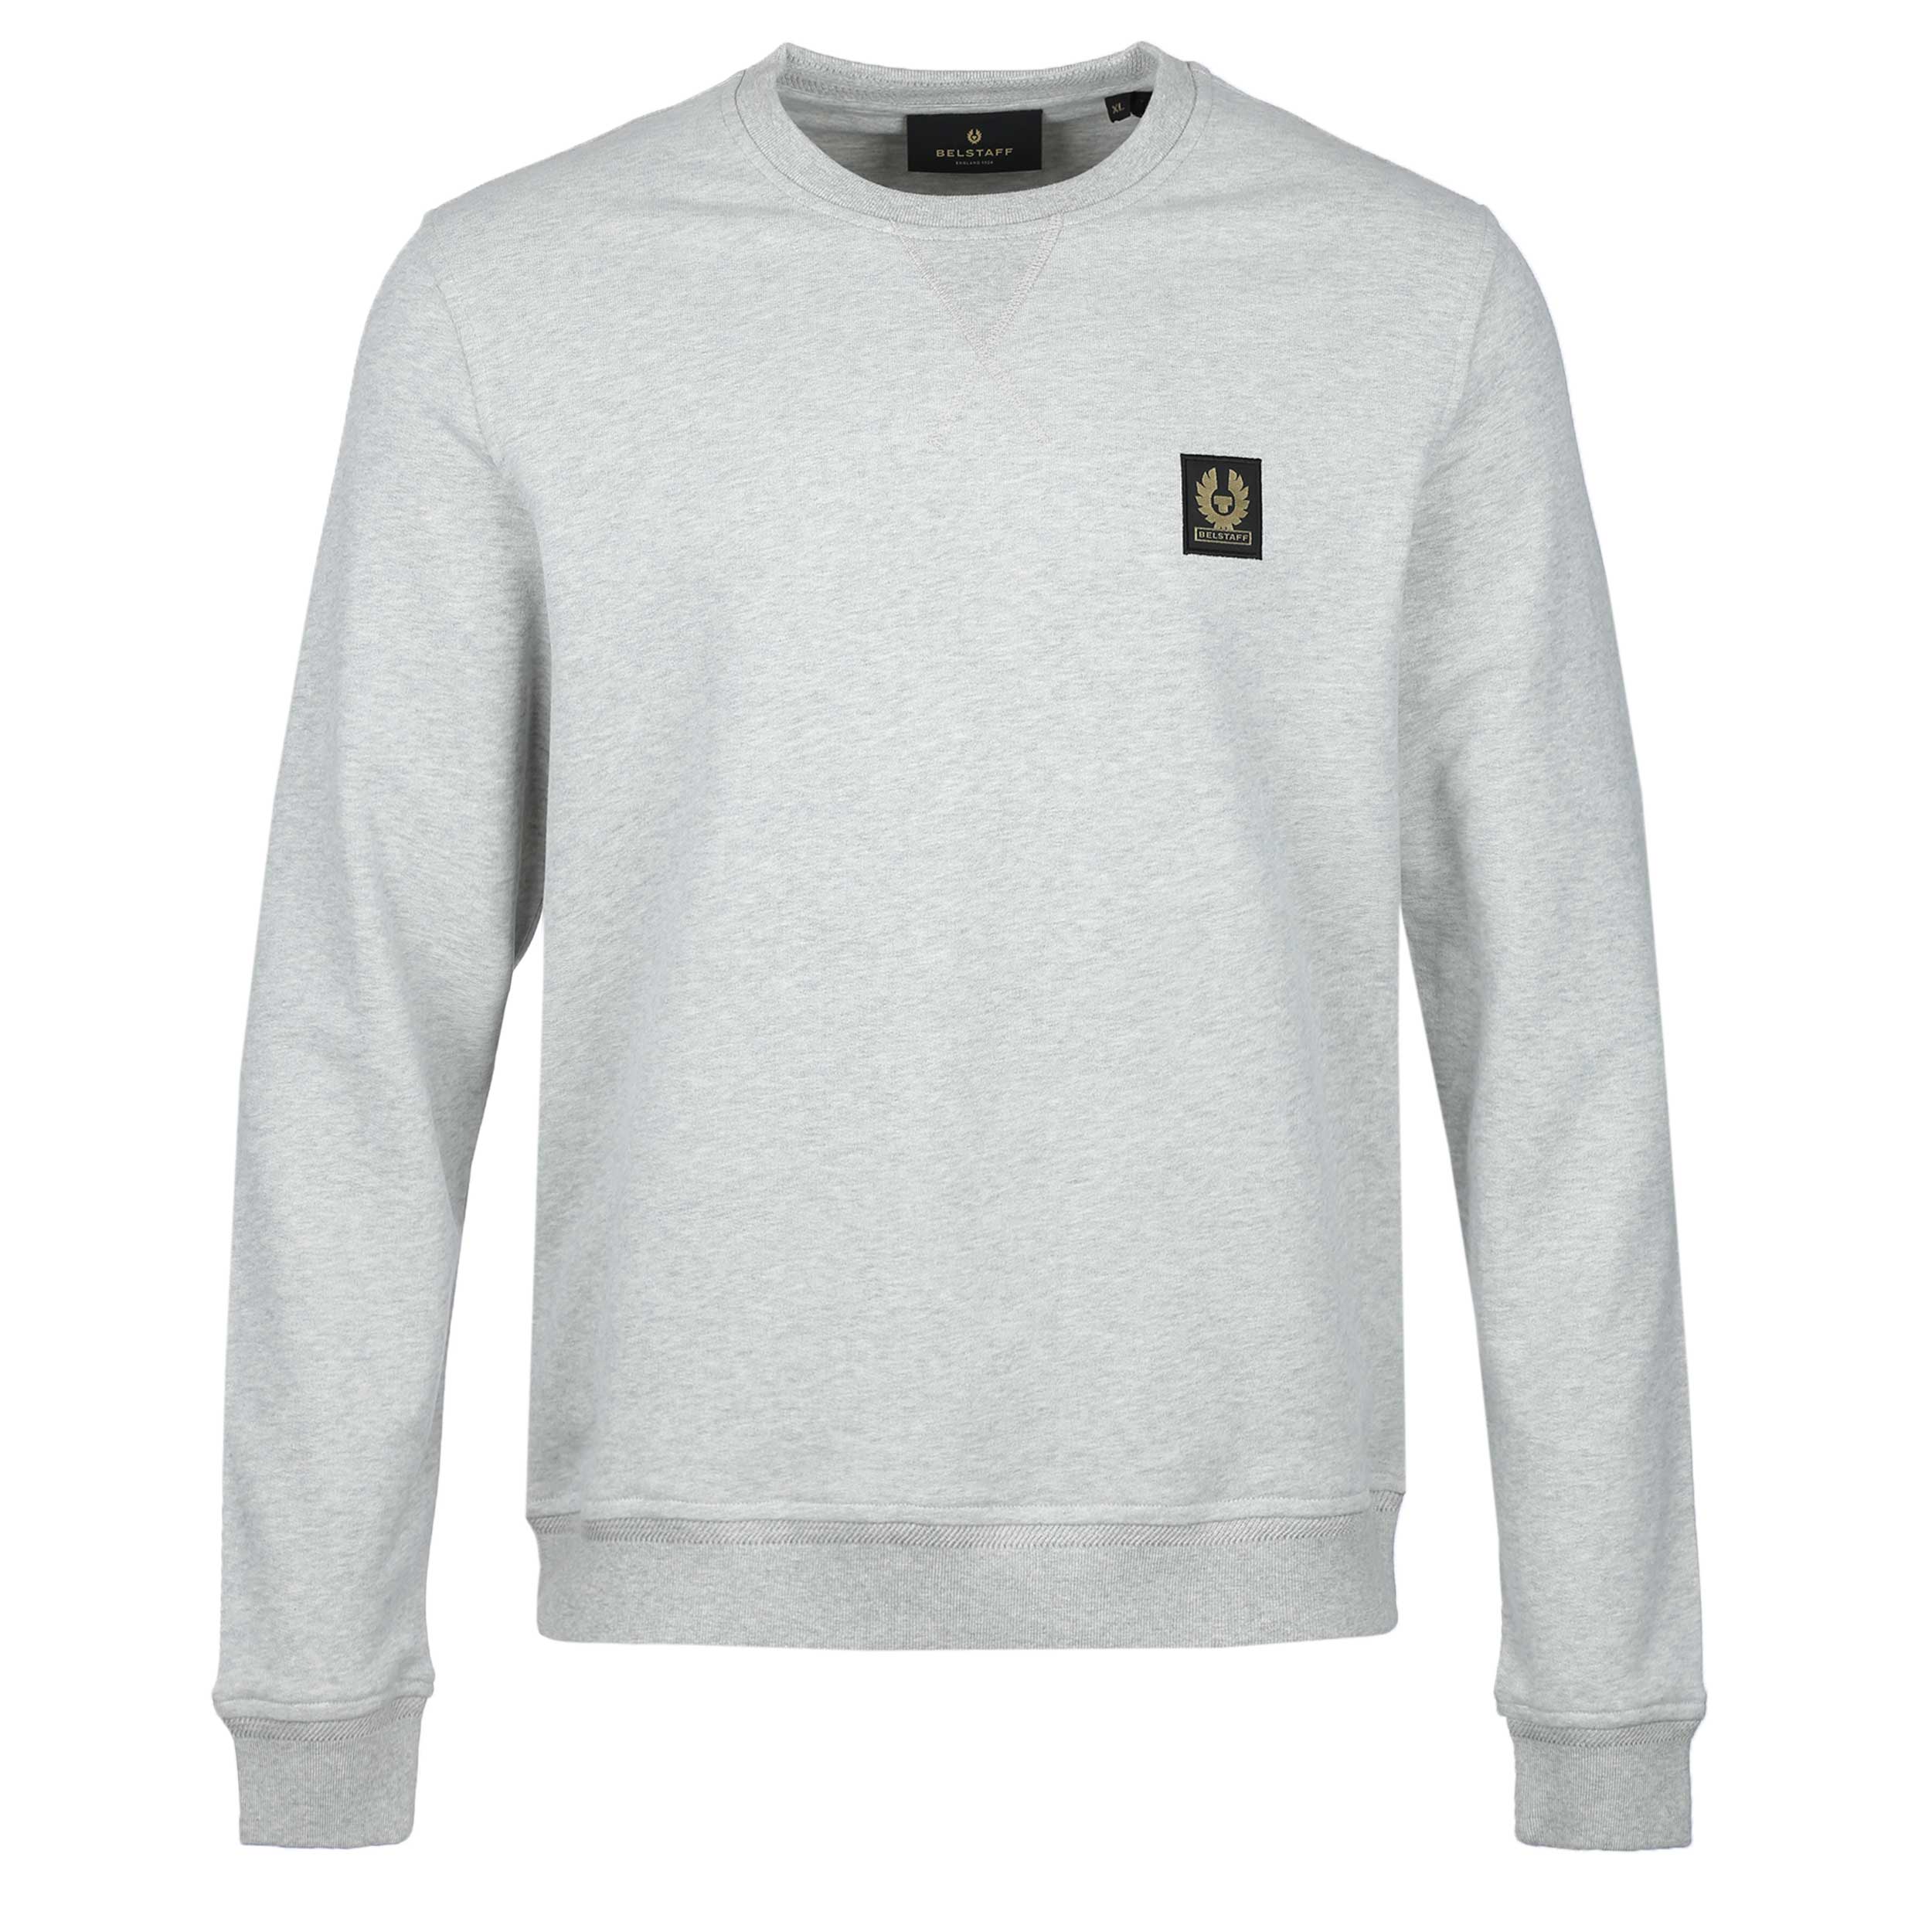 Belstaff Classic Sweat Top in Old Silver Heather